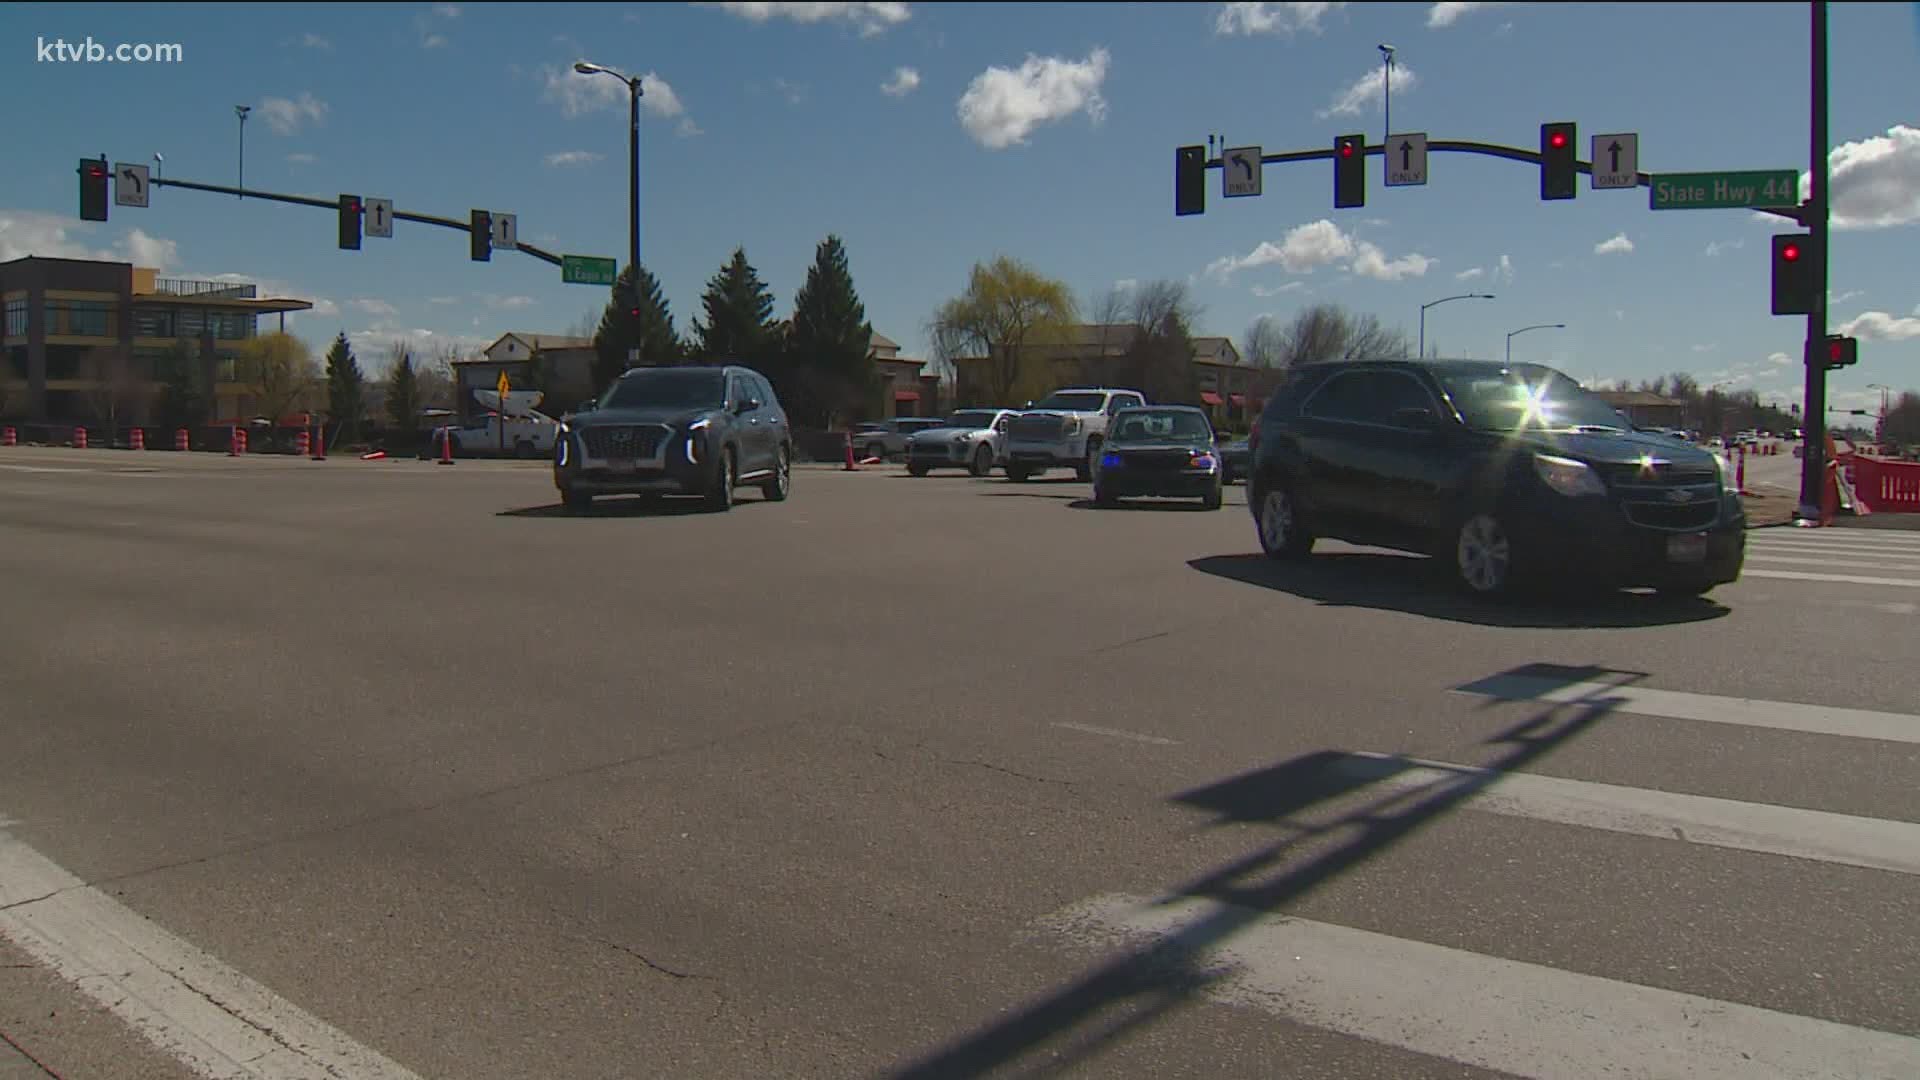 After re-evaluation, the Idaho Transportation Department is scrapping the idea of a "continuous flow intersection."